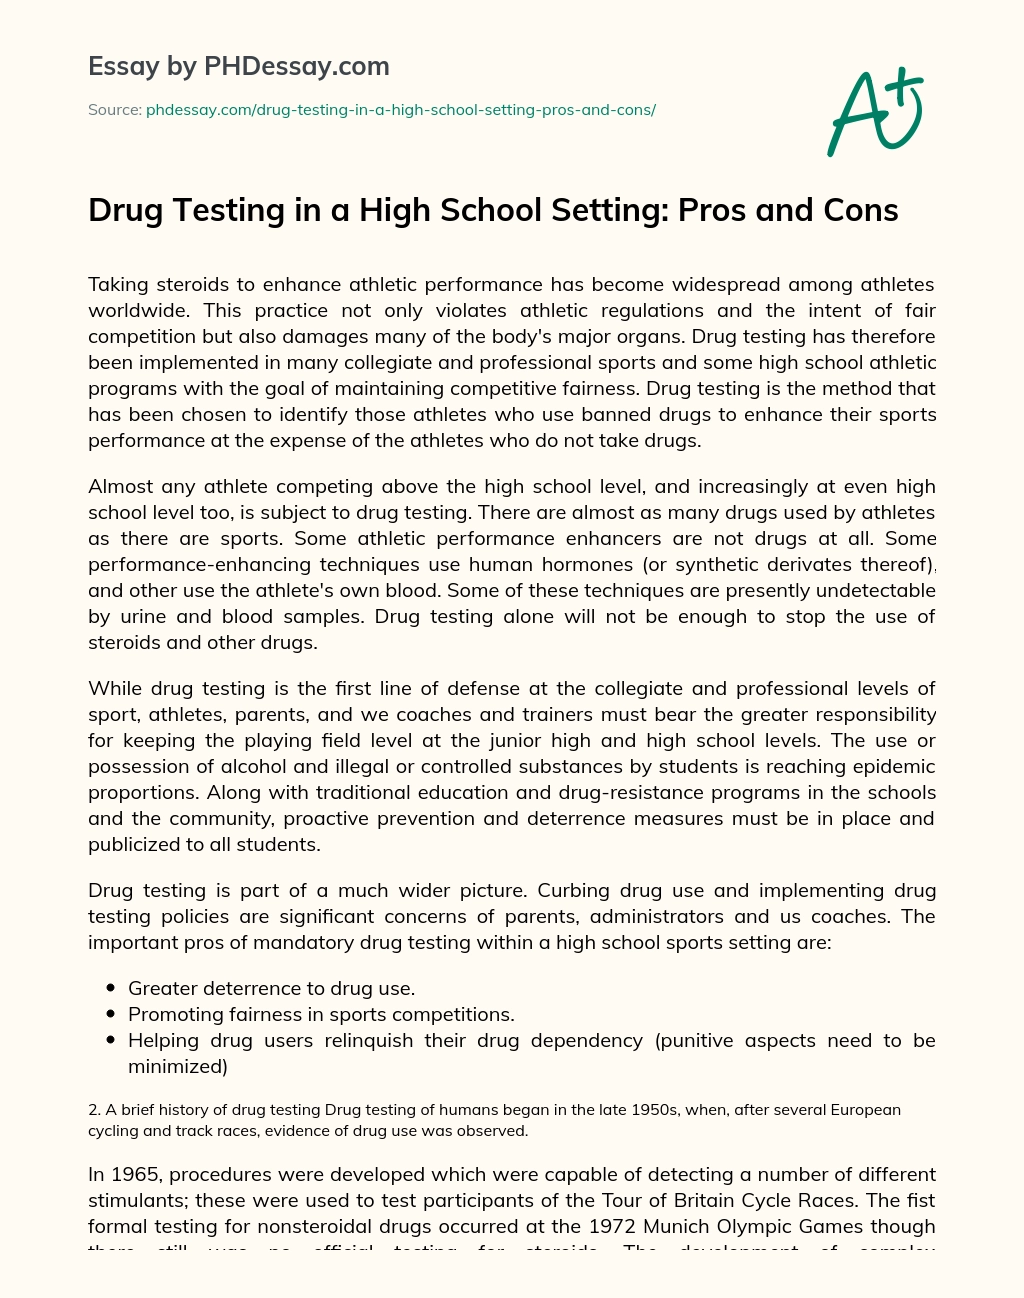 drug testing at school pros and cons